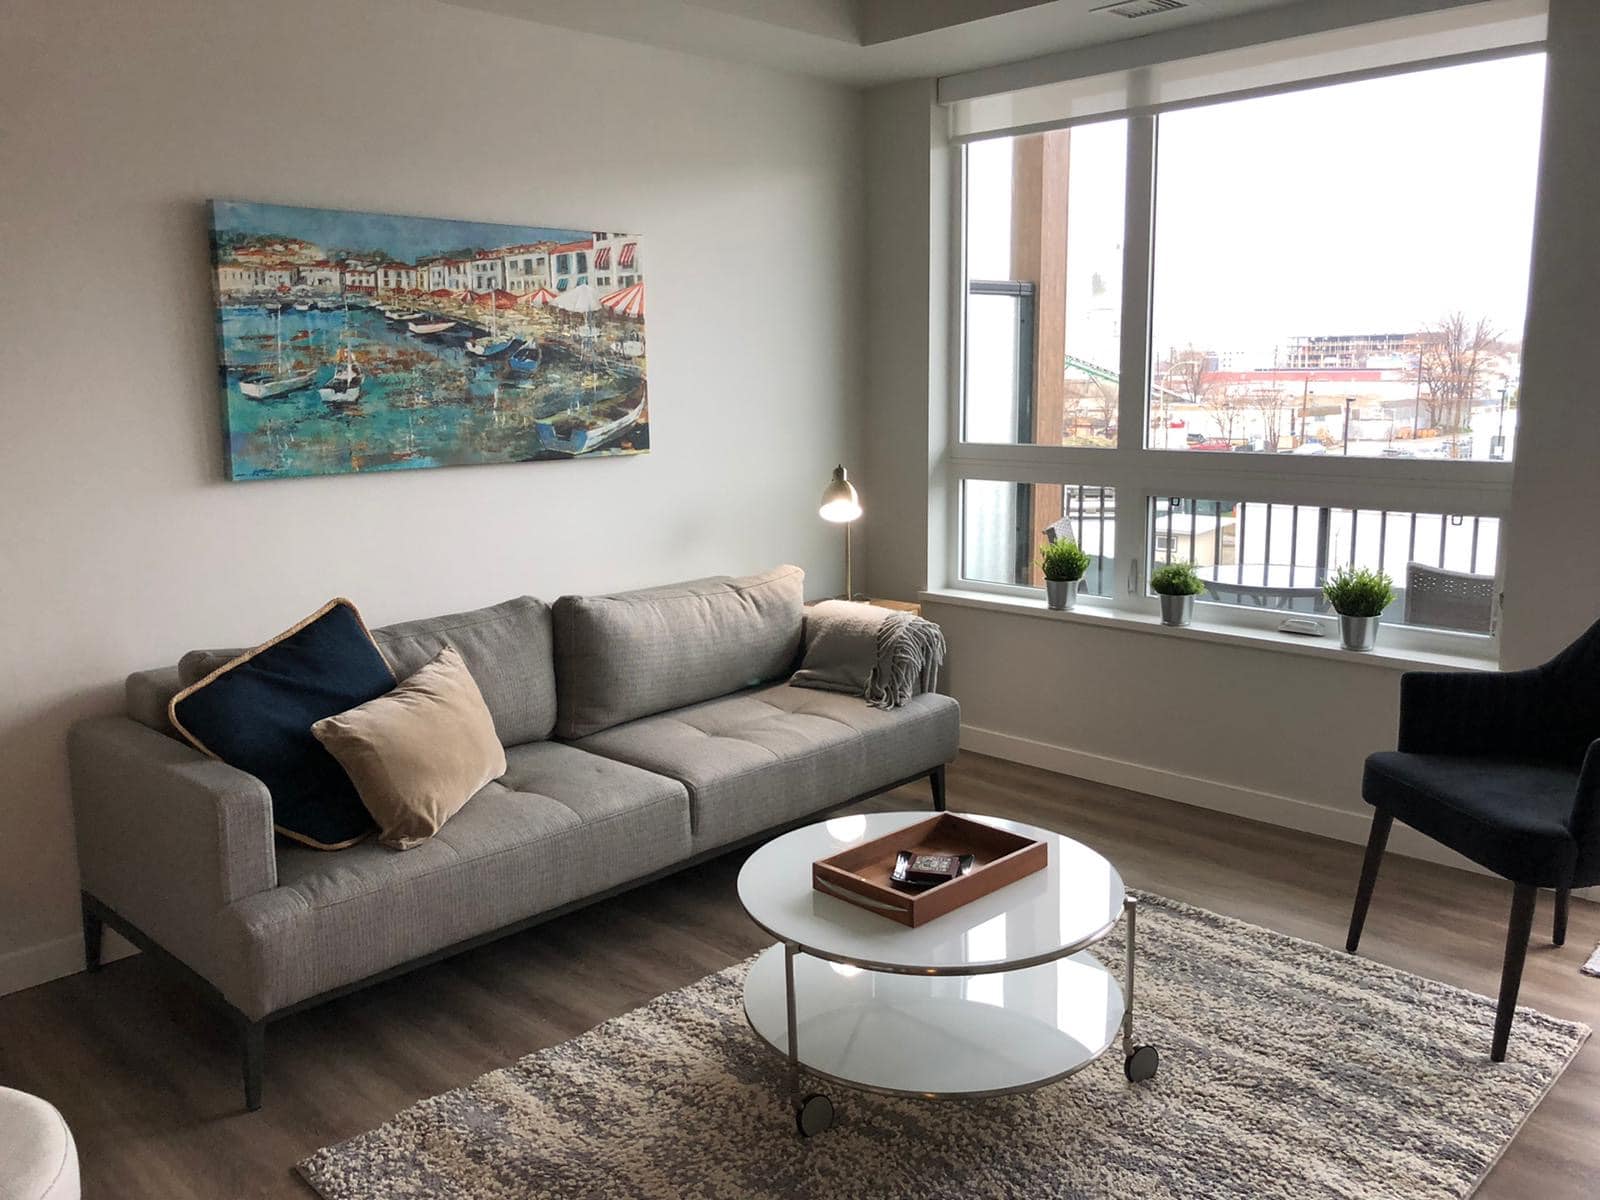 kelowna airbnb management services